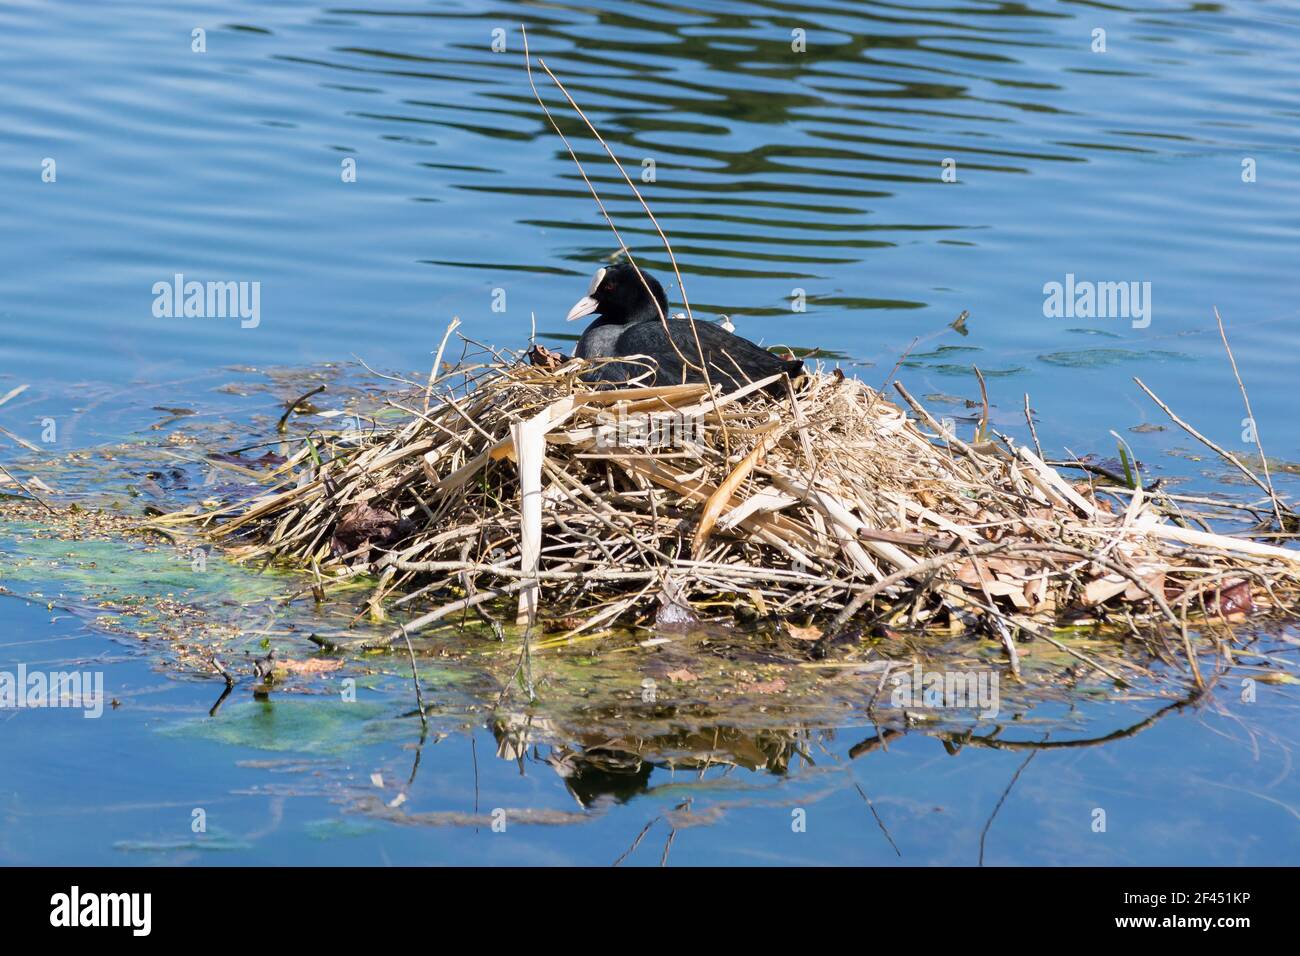 Female Eurasian coot or common coot nesting in the middle of a pond a member of the Rallidae family and found throughout Europe, Asia and Australasia Stock Photo